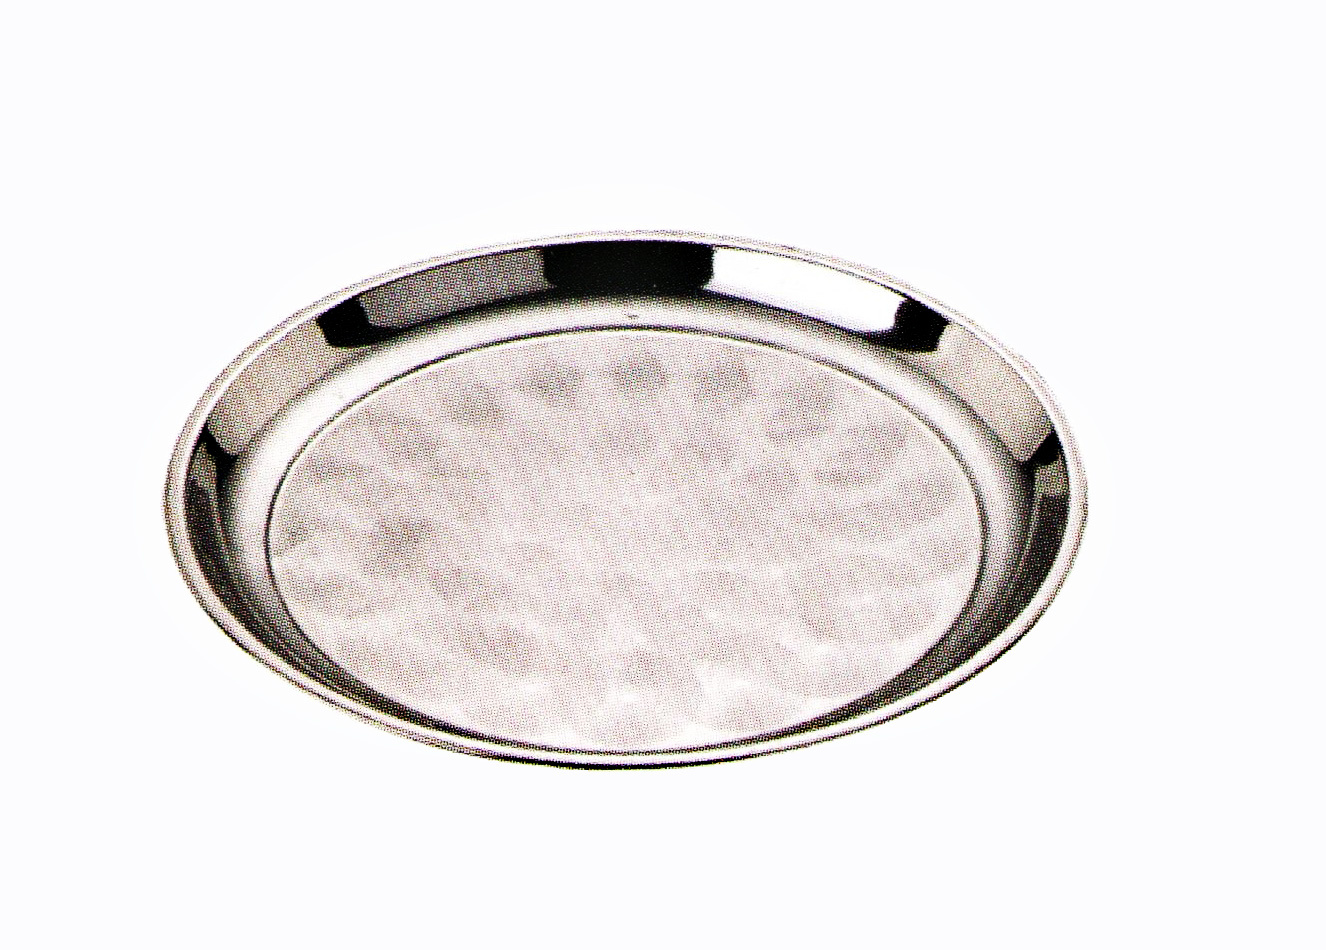 Professional China Metal Dish Rack -
 Stainless Steel Kitchenware Decorative Pattern Round Plate Tray / Dinner Plate Sp026 – Long Prosper